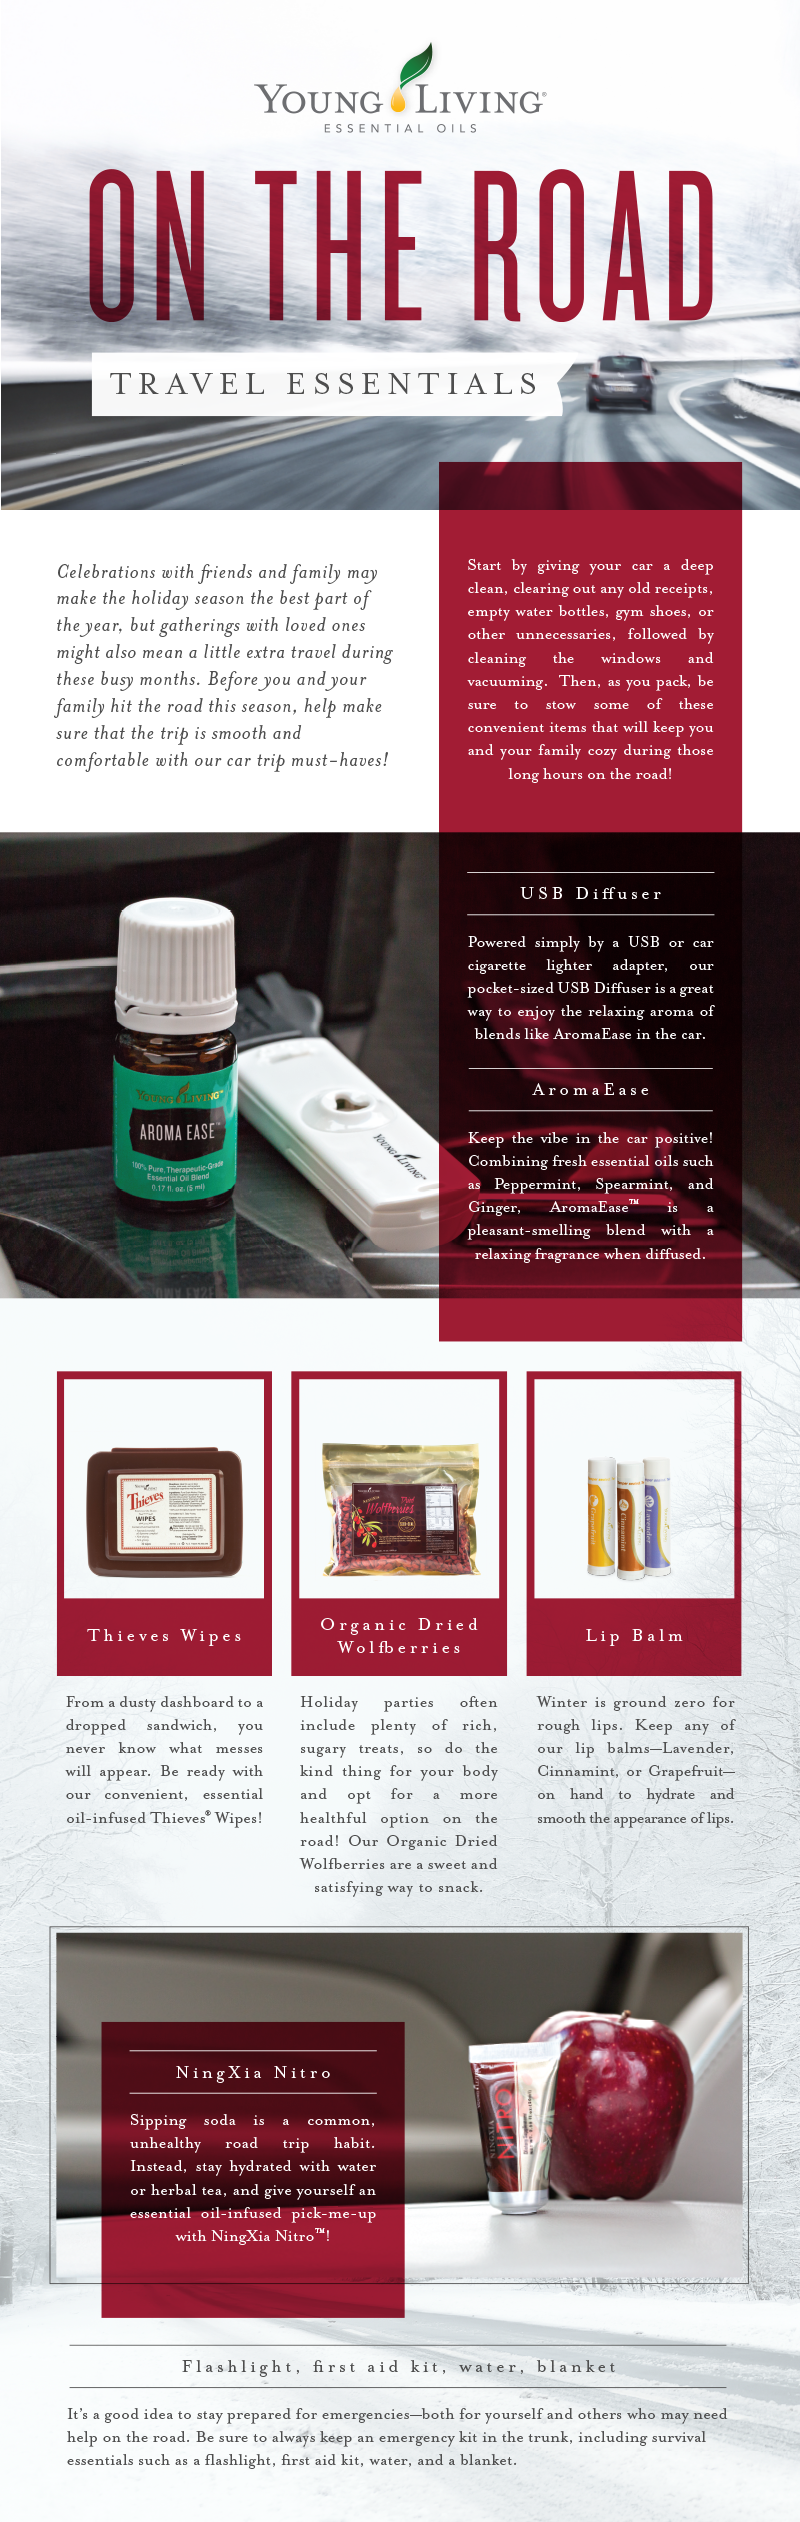 Young Living Travel Essentials - on-the-road-travel-essentials-infographic